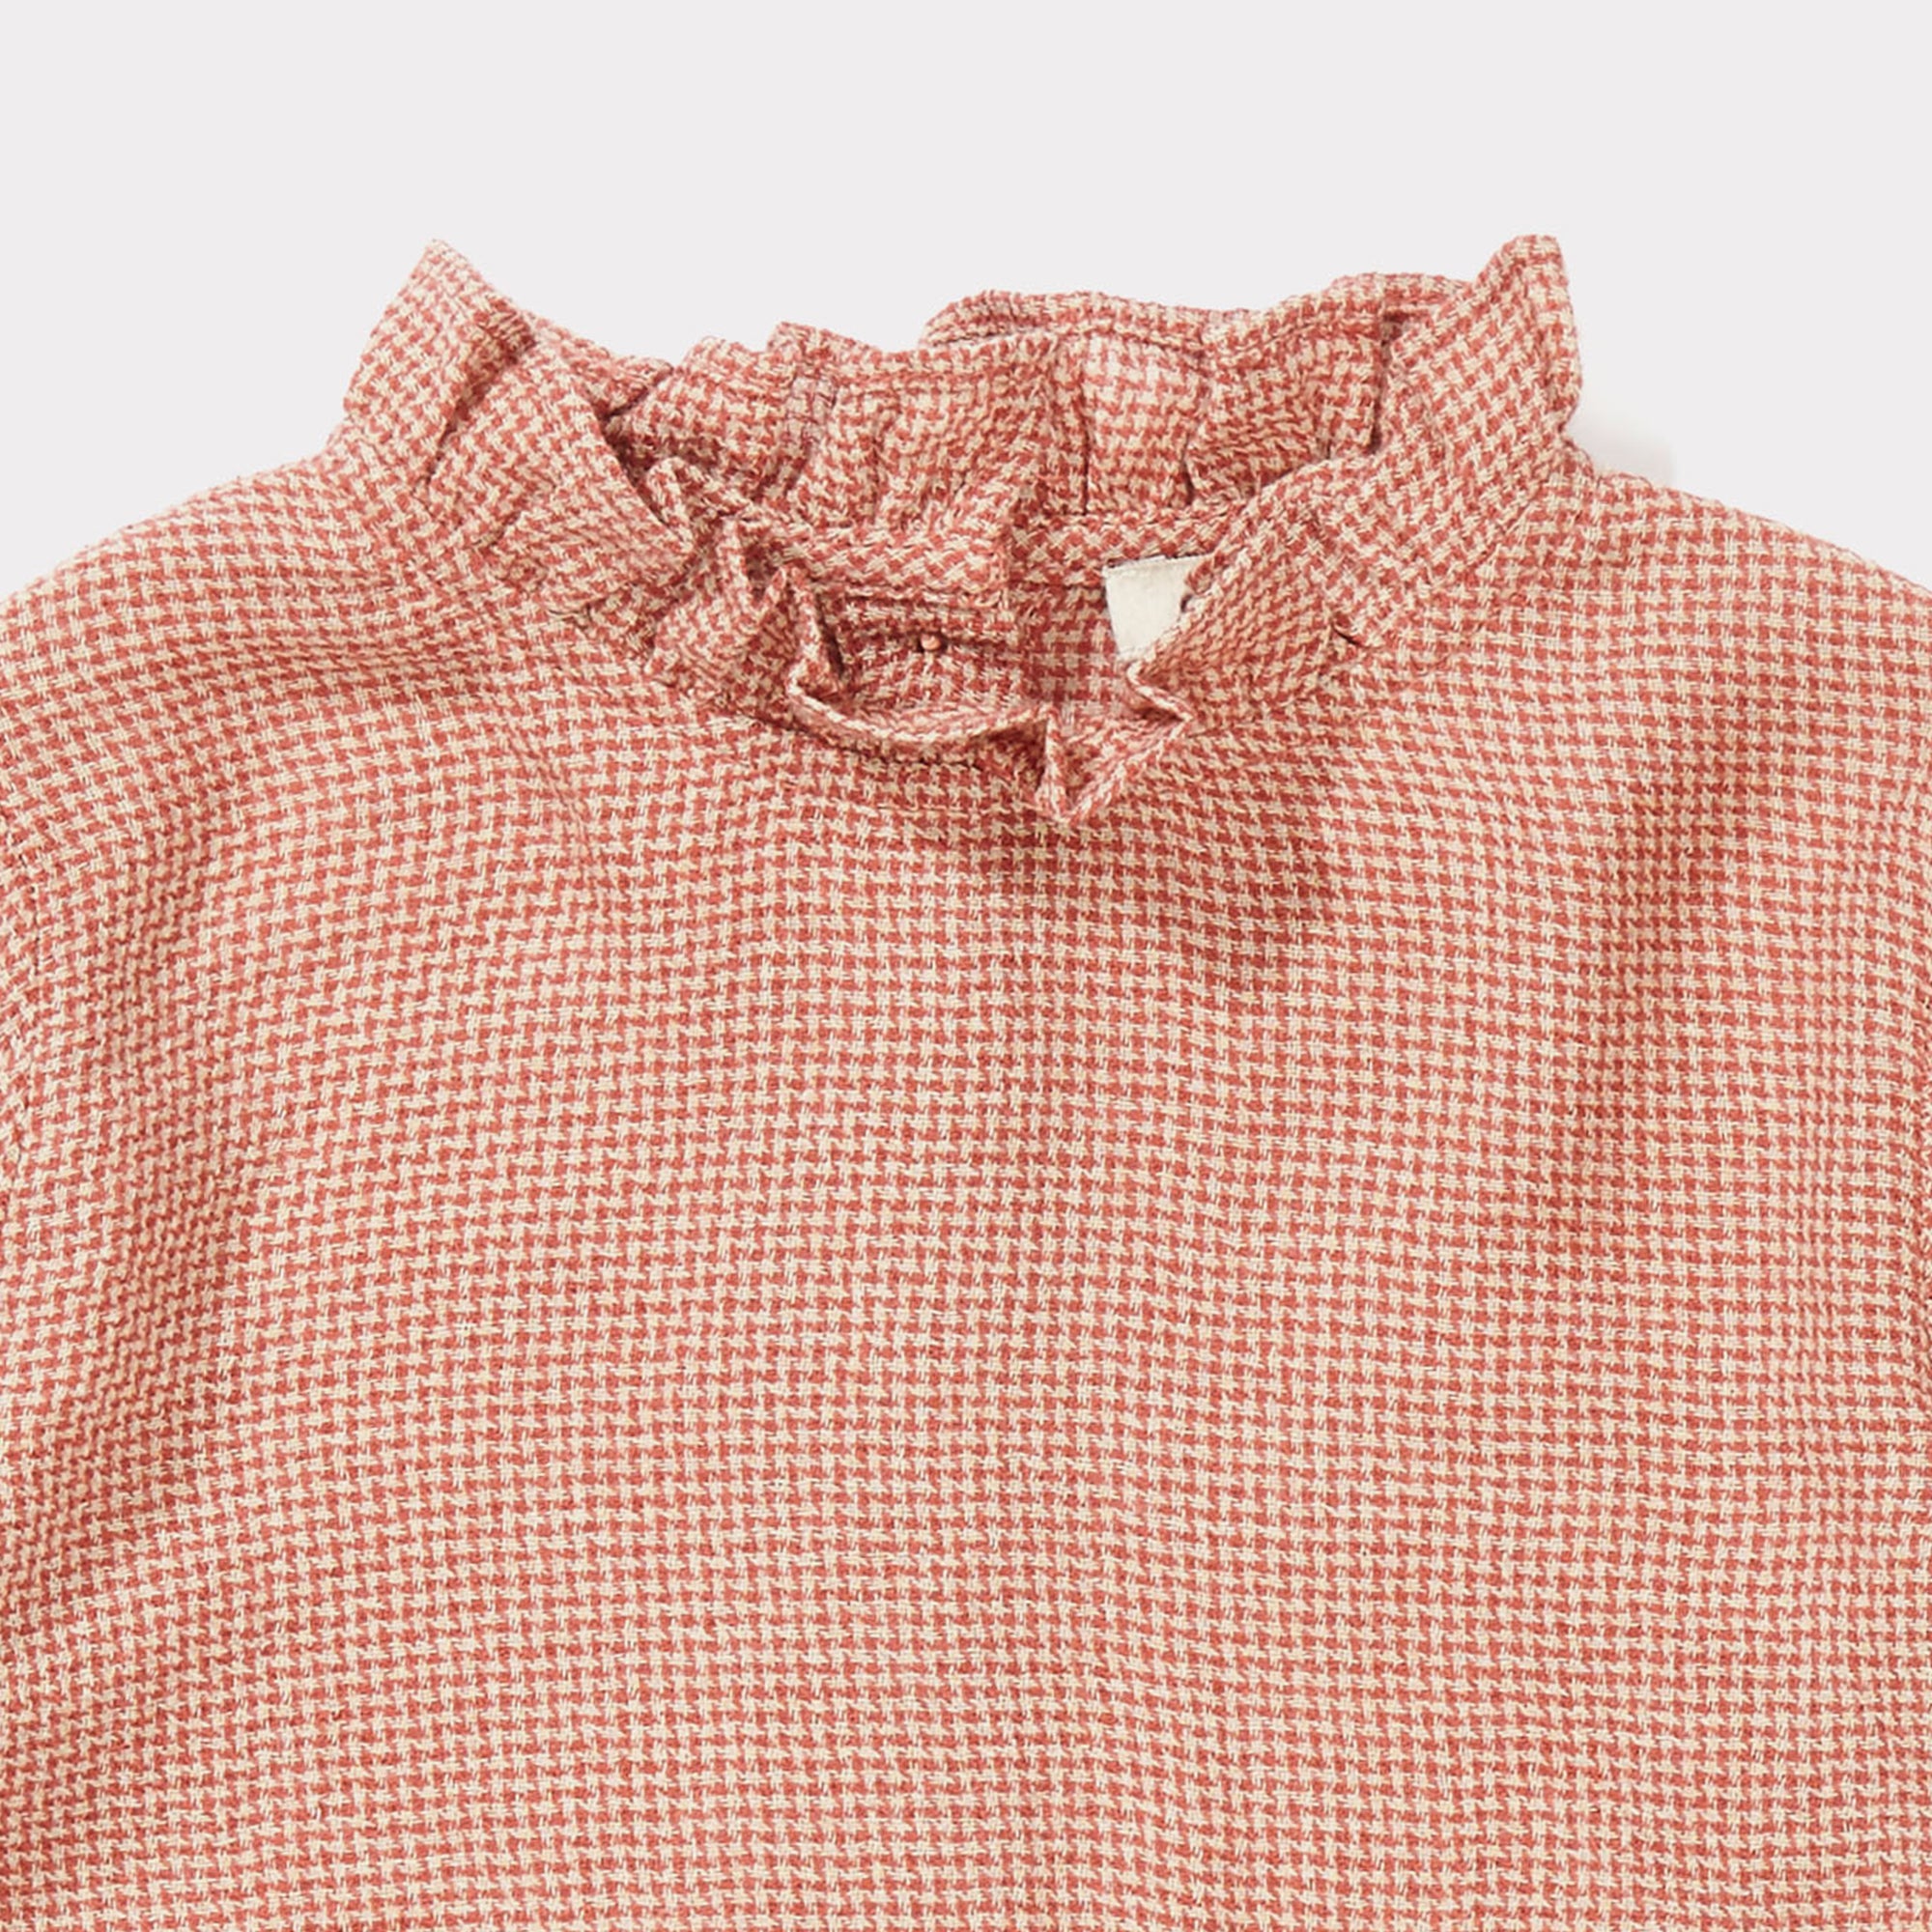 Baby Girls Peach Mirco Houndstooth Blouse